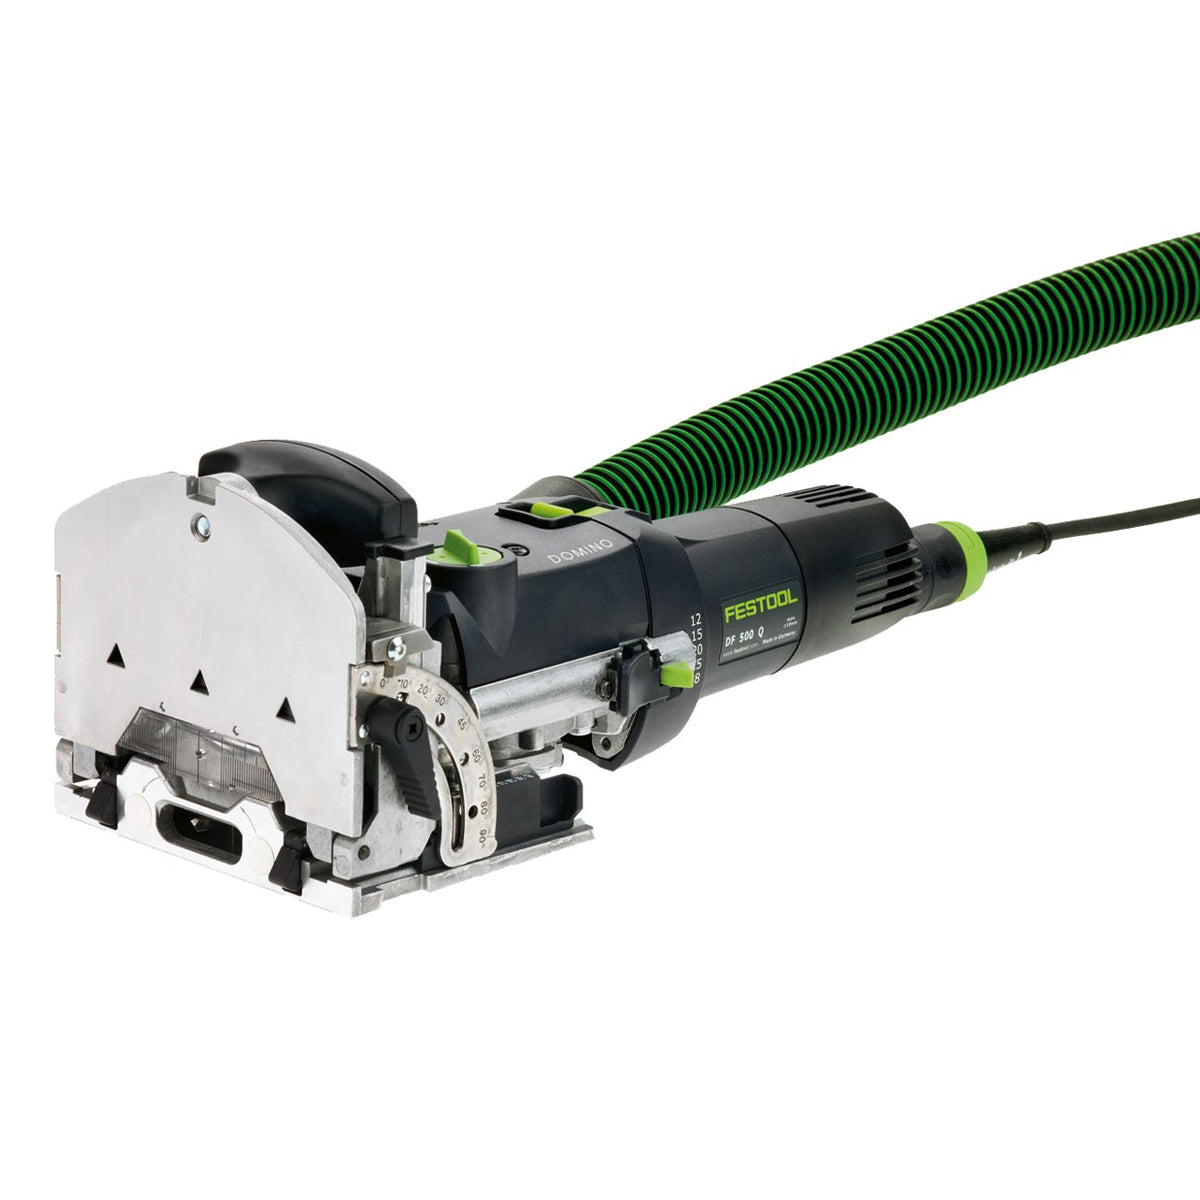 Festool DF 500 Q-Plus 110V GB Domino Joining Machine In Systainer SYS3 M 187 - 576417